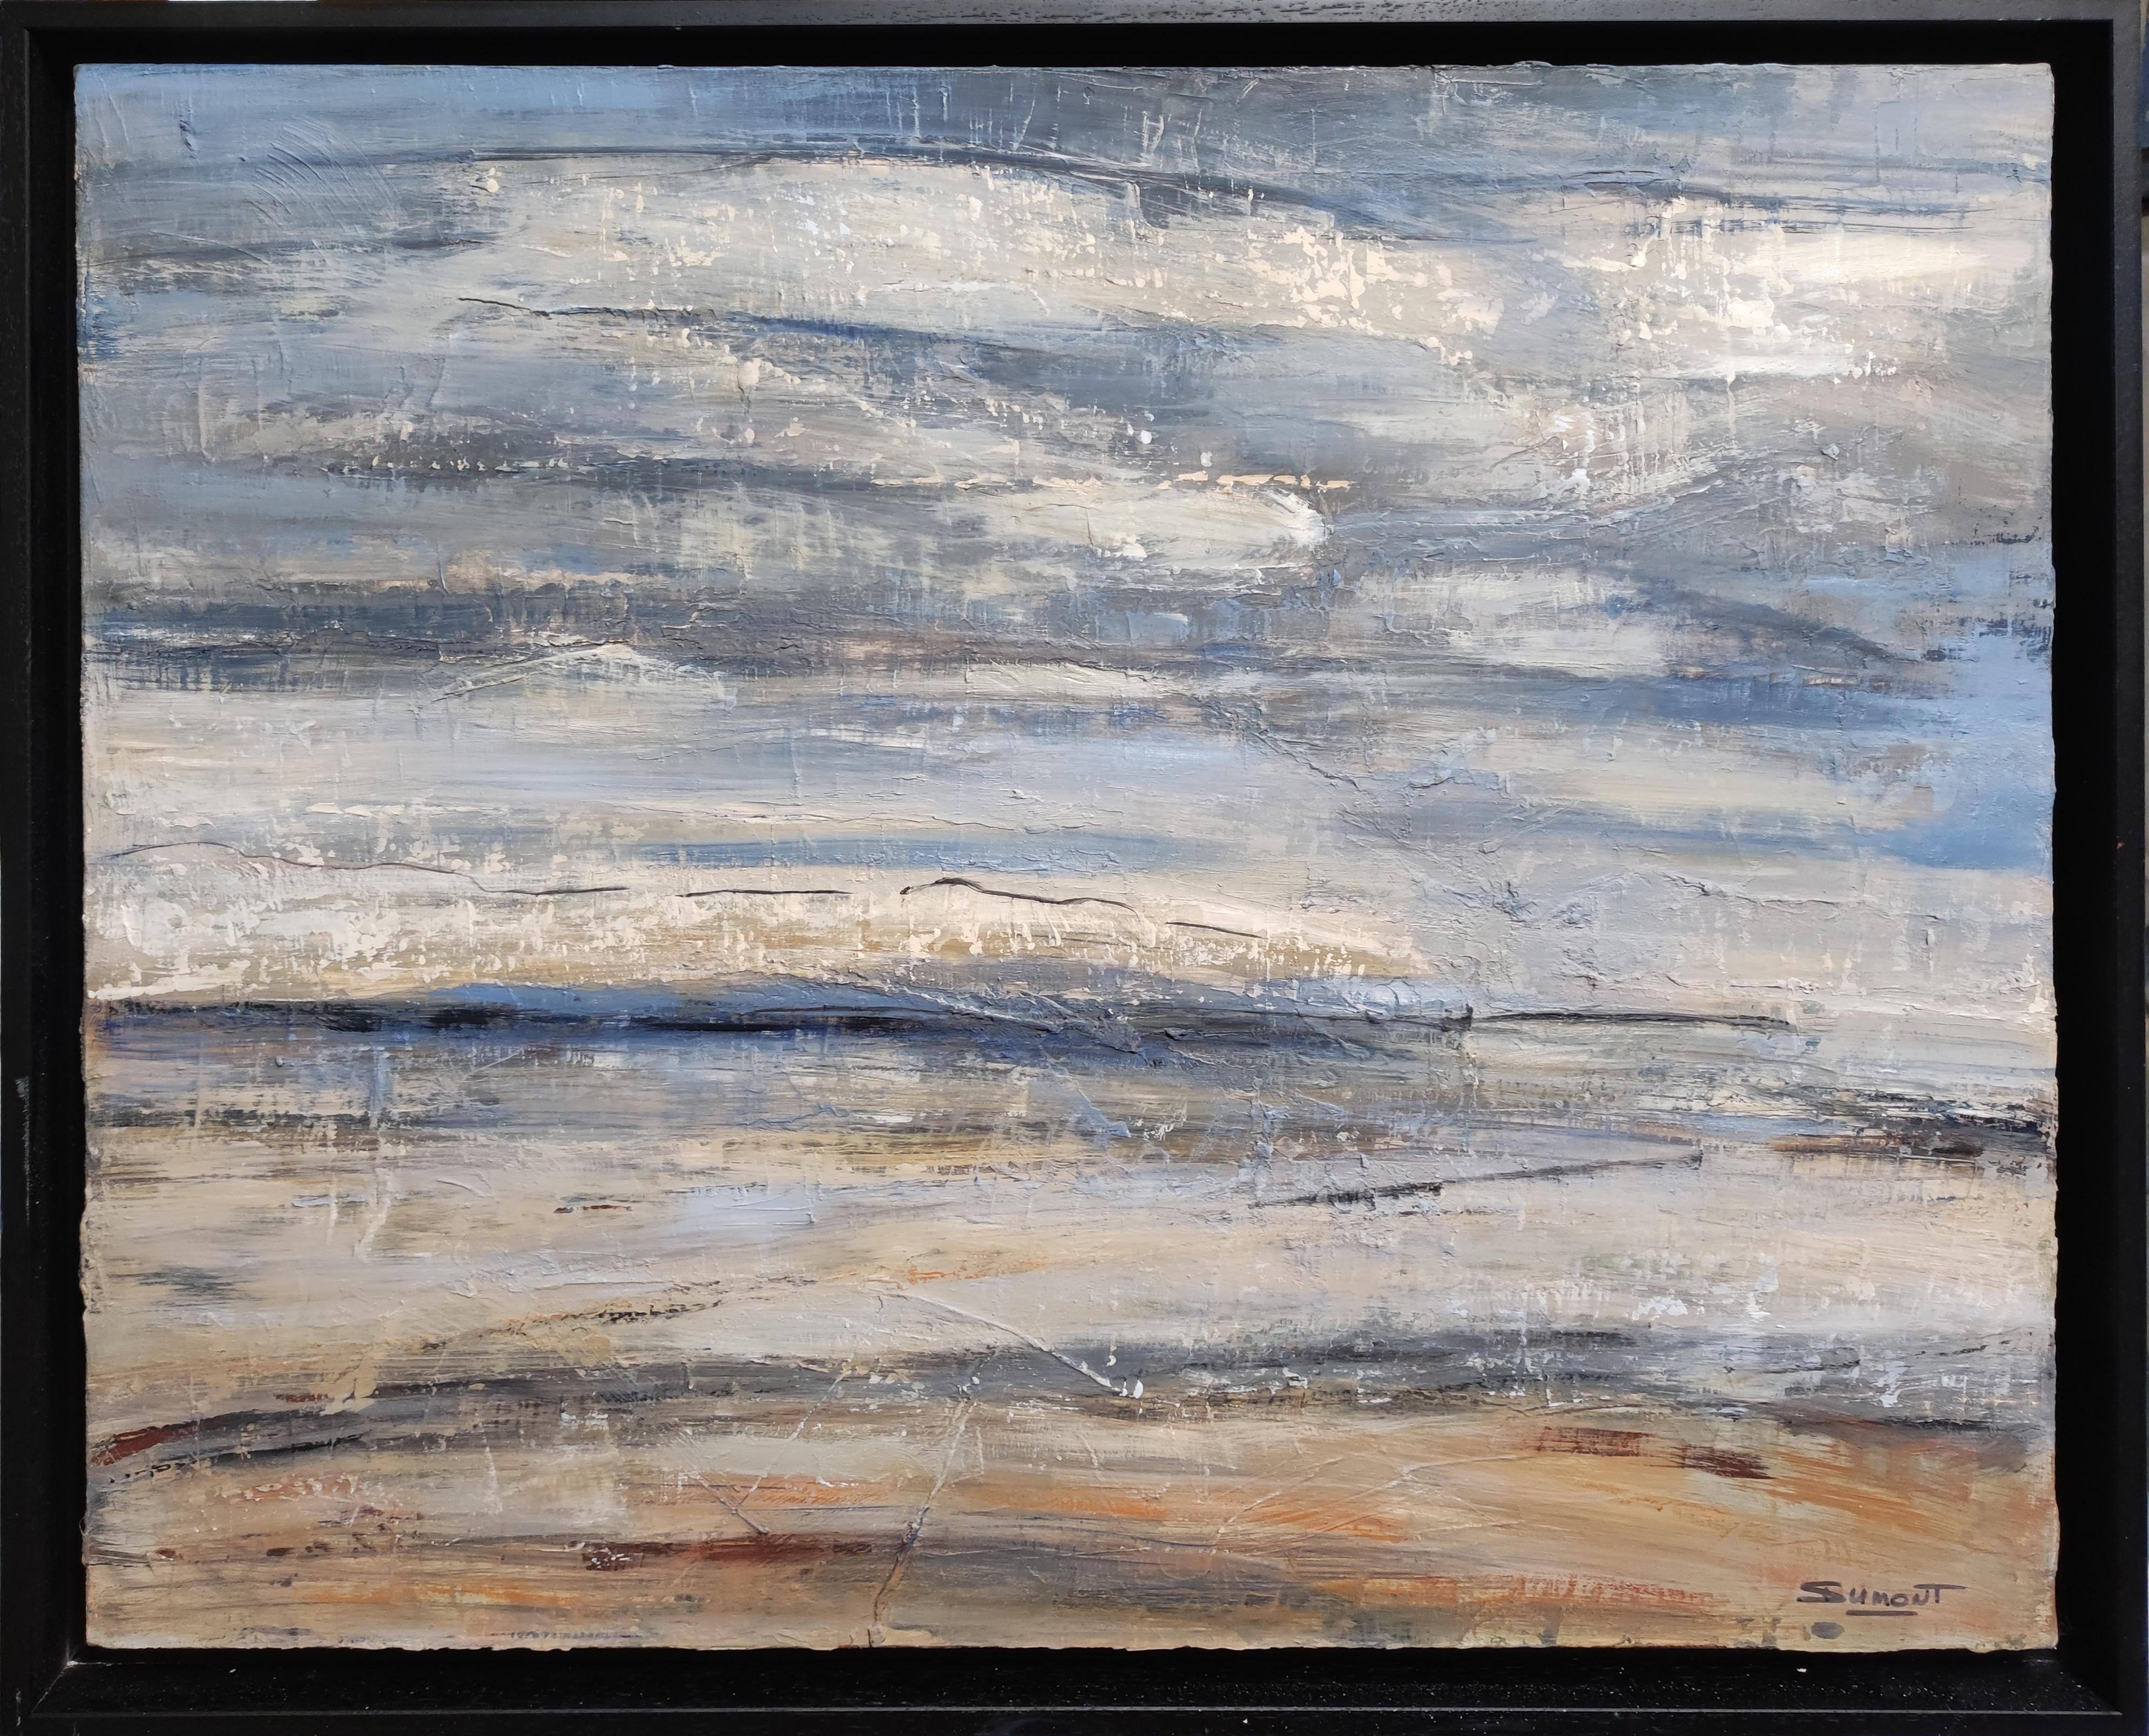 SOPHIE DUMONT Landscape Painting - Seascape, Blue Seaside, Oil on canvas, Sky, Impressionism Abstract Expressionism